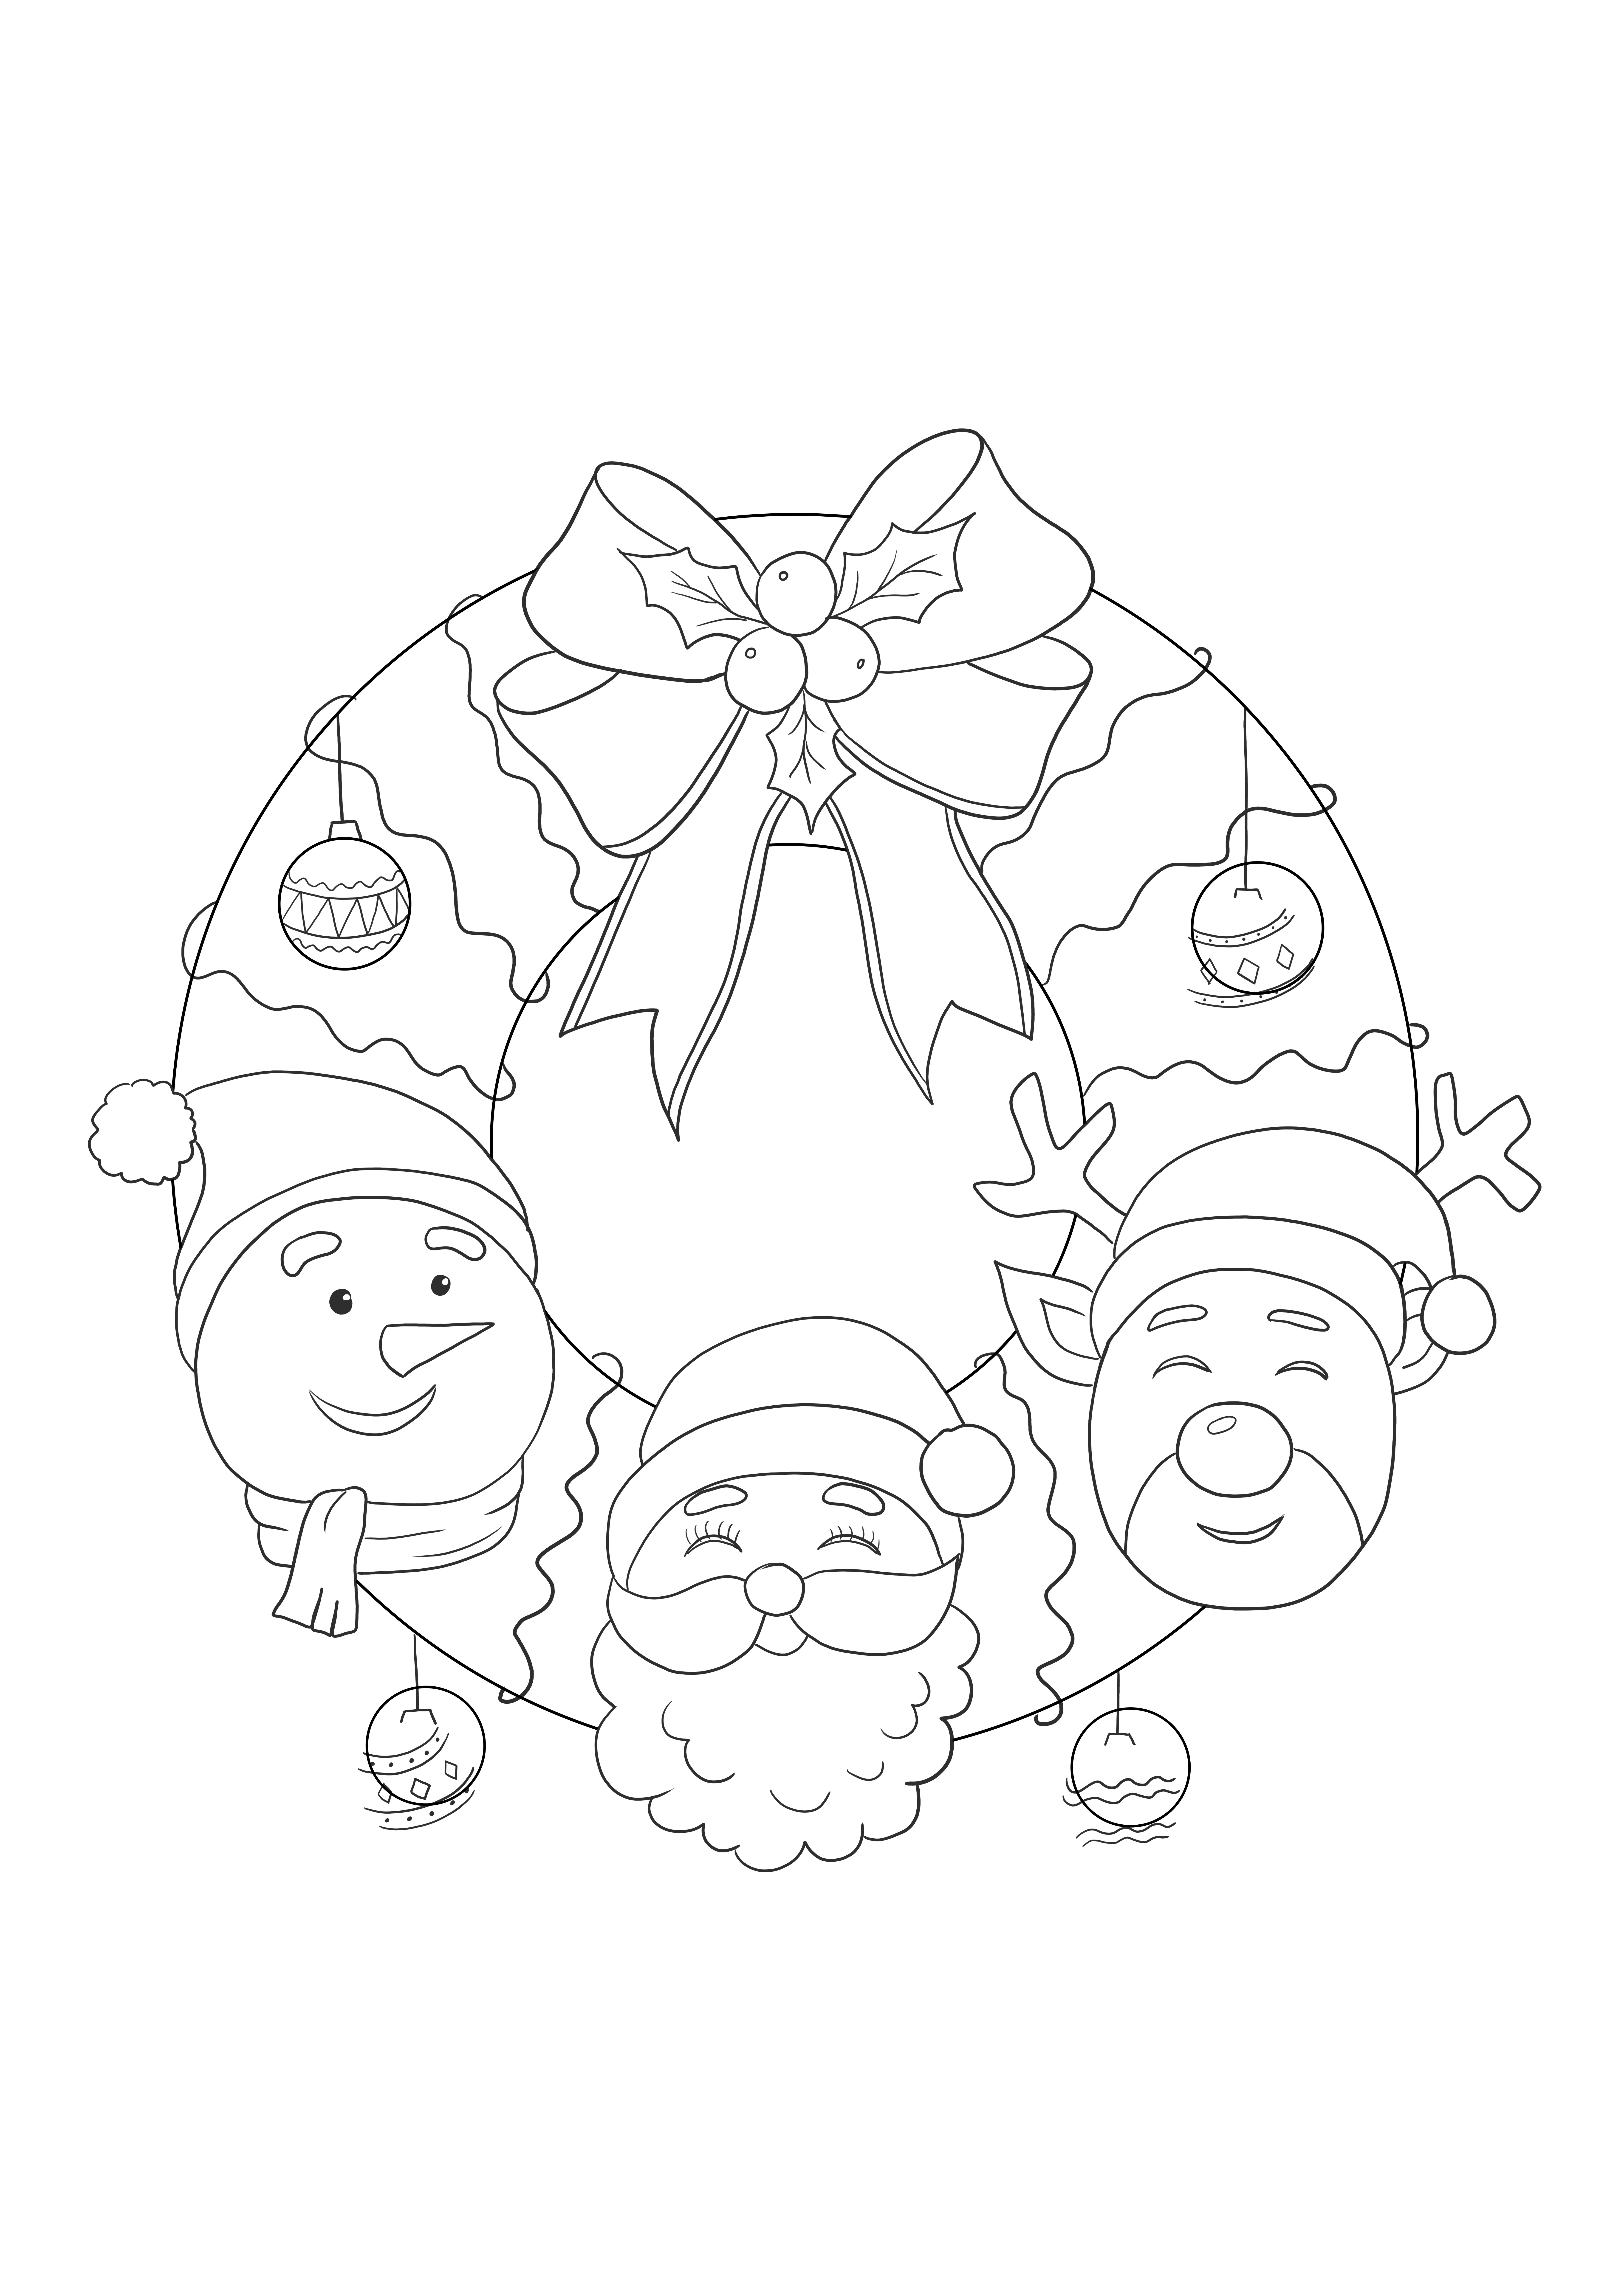 Simple and detailed winter wreath free to download and color sheet